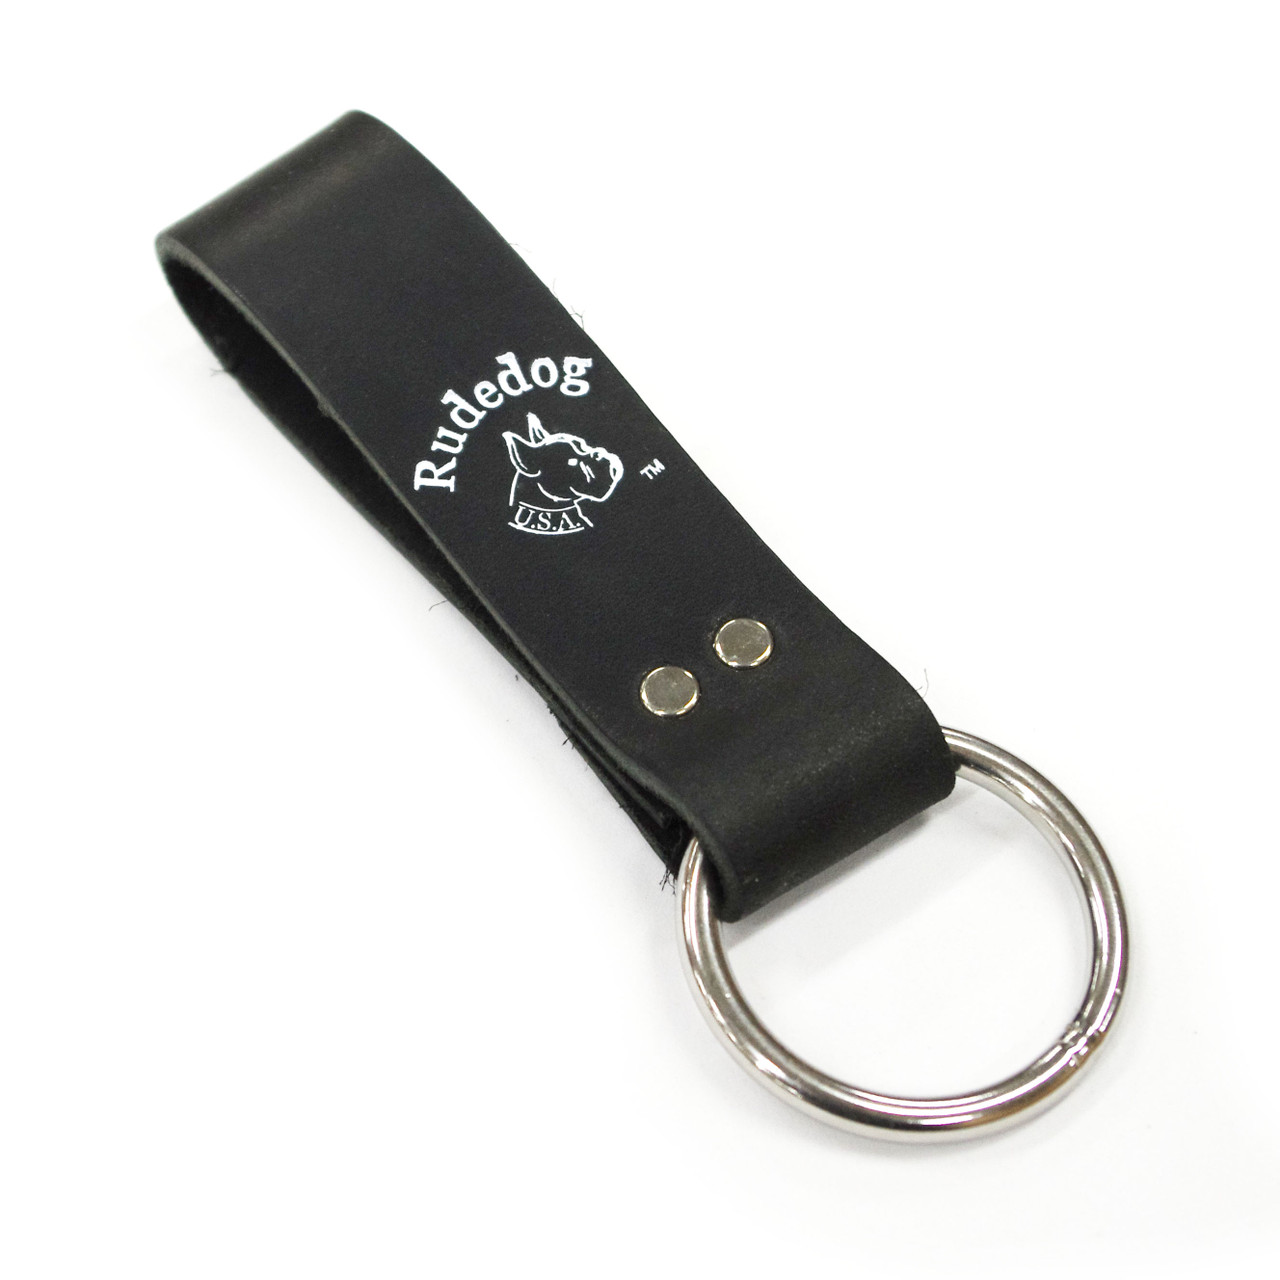 Rudedog Spud Ring from Columbia Safety